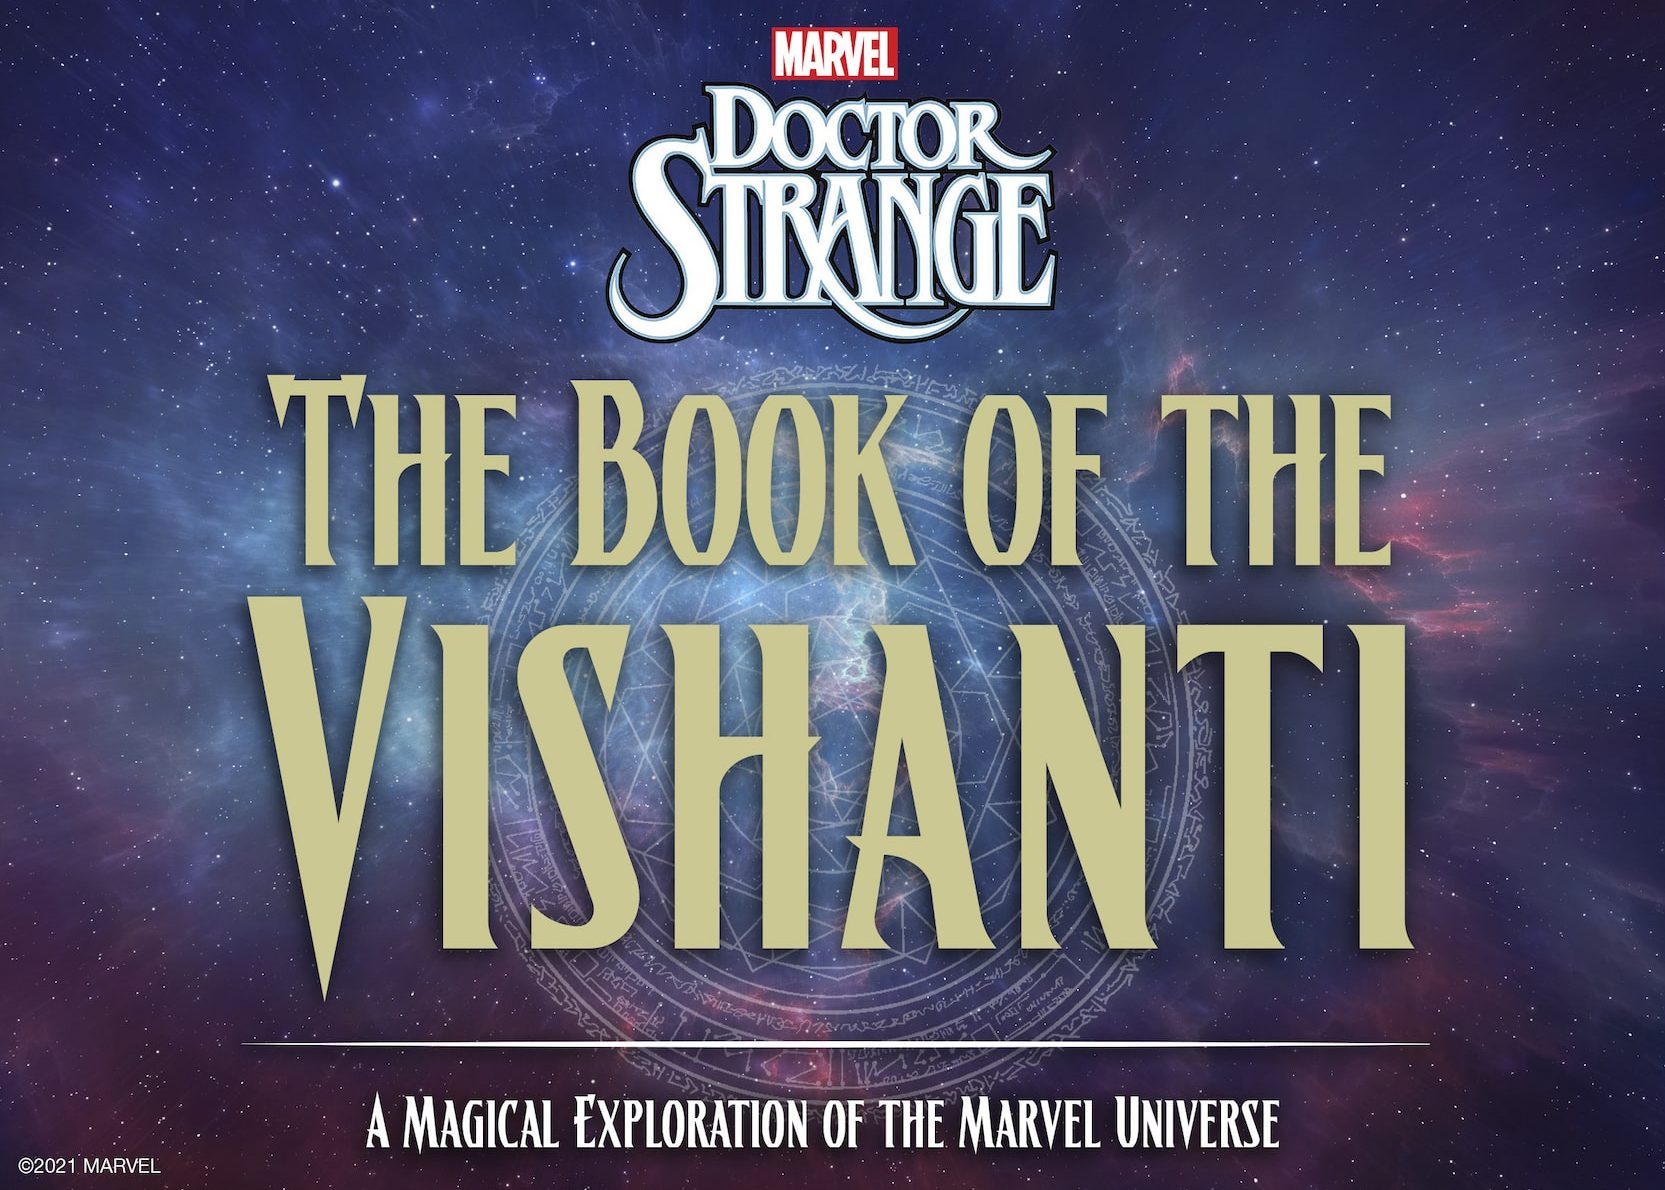 'Doctor Strange: The Book of the Vishanti: A Magical Exploration of the Marvel Universe' review